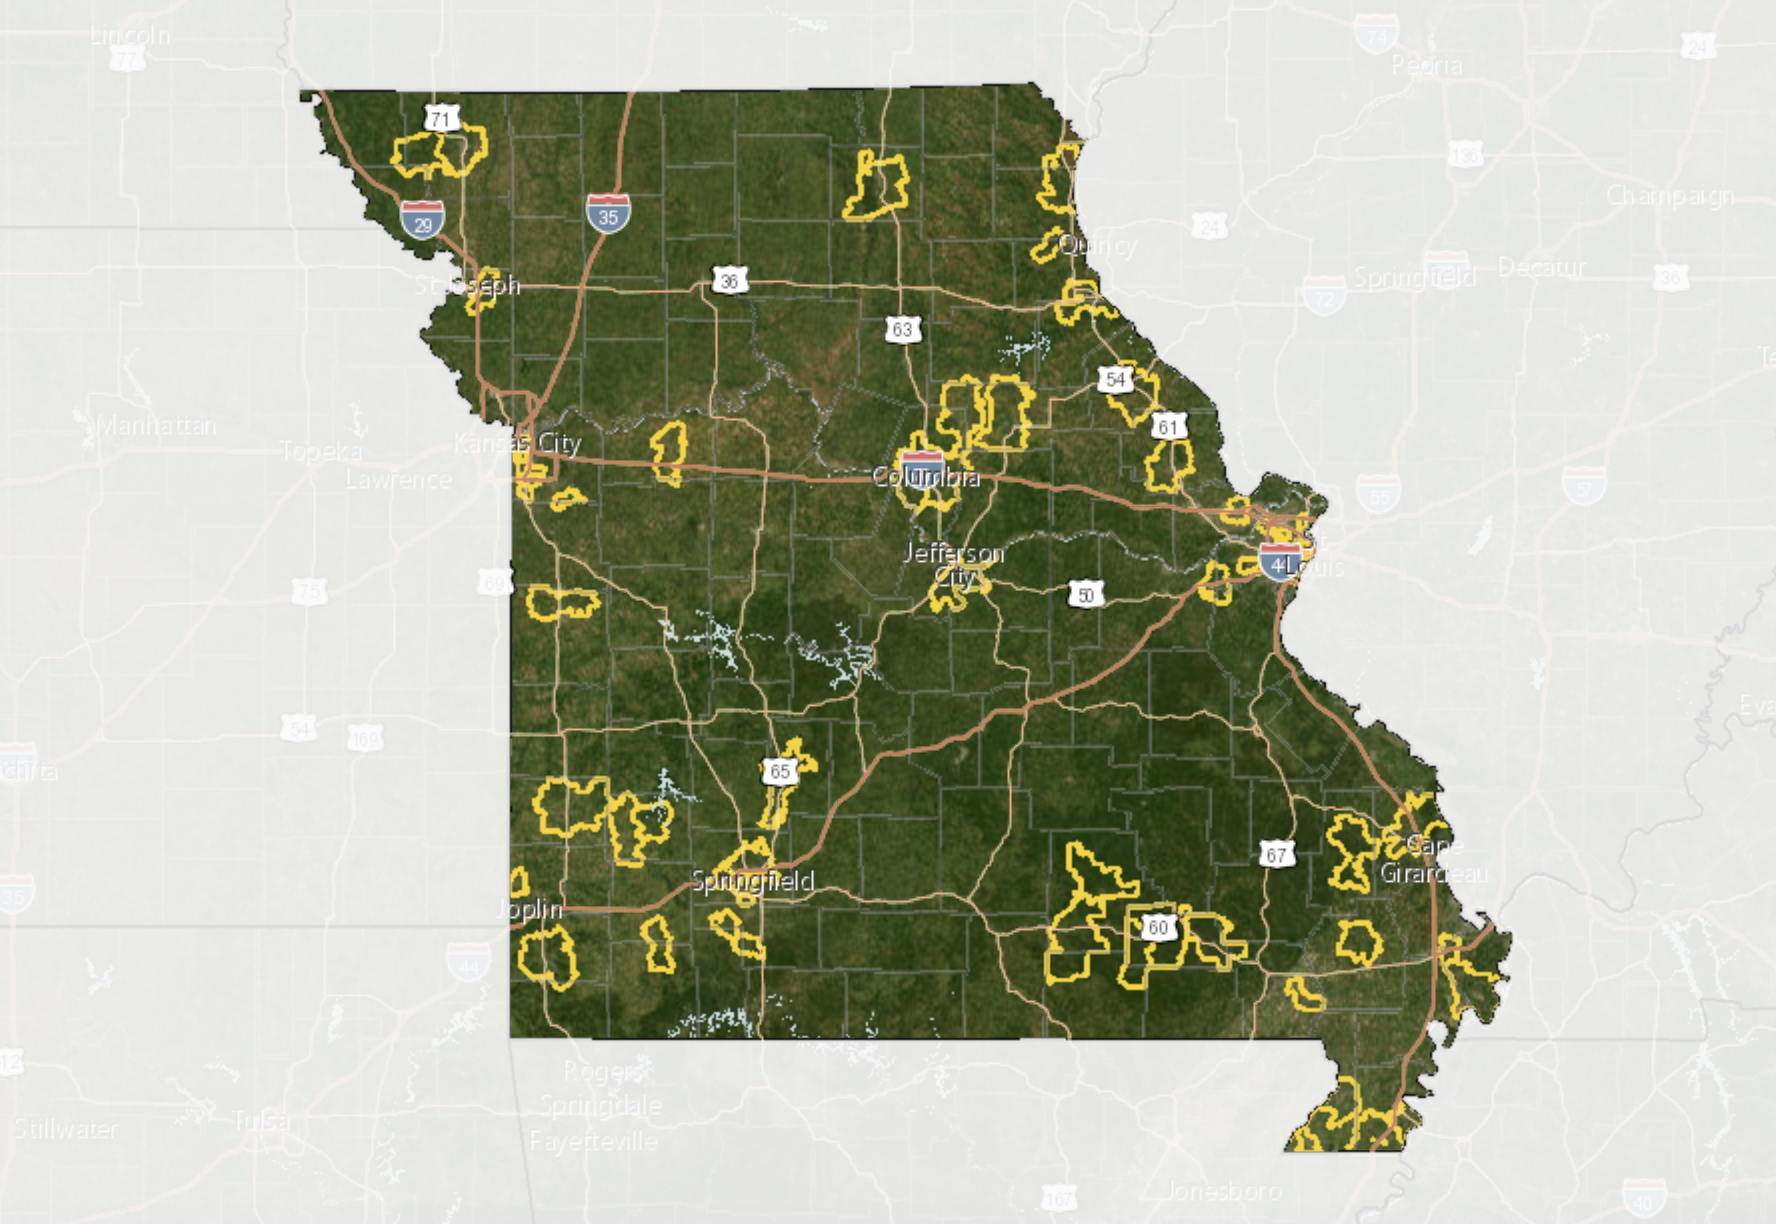 This image shows a preview of locations where broadband focus groups took place across the state of Missouri.